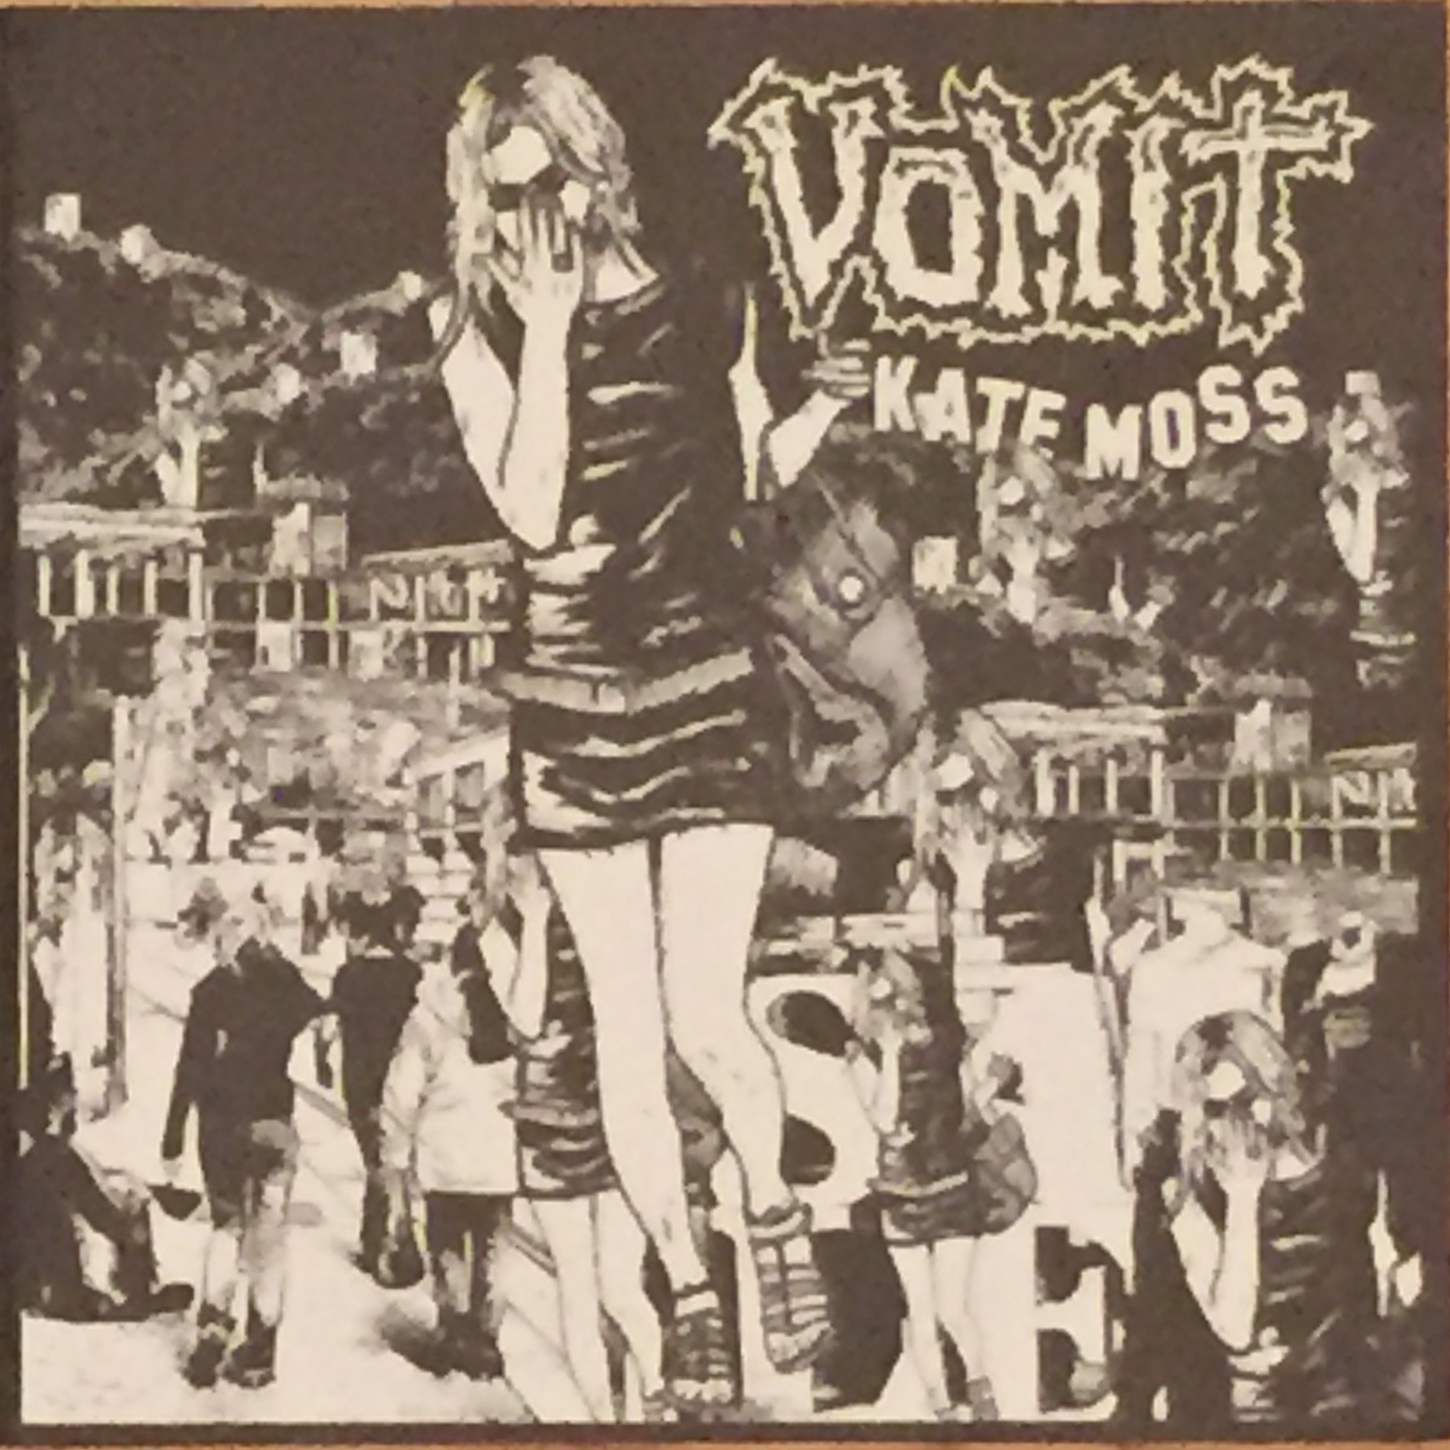 VOMIT (CA-2) - Kate Moss cover 